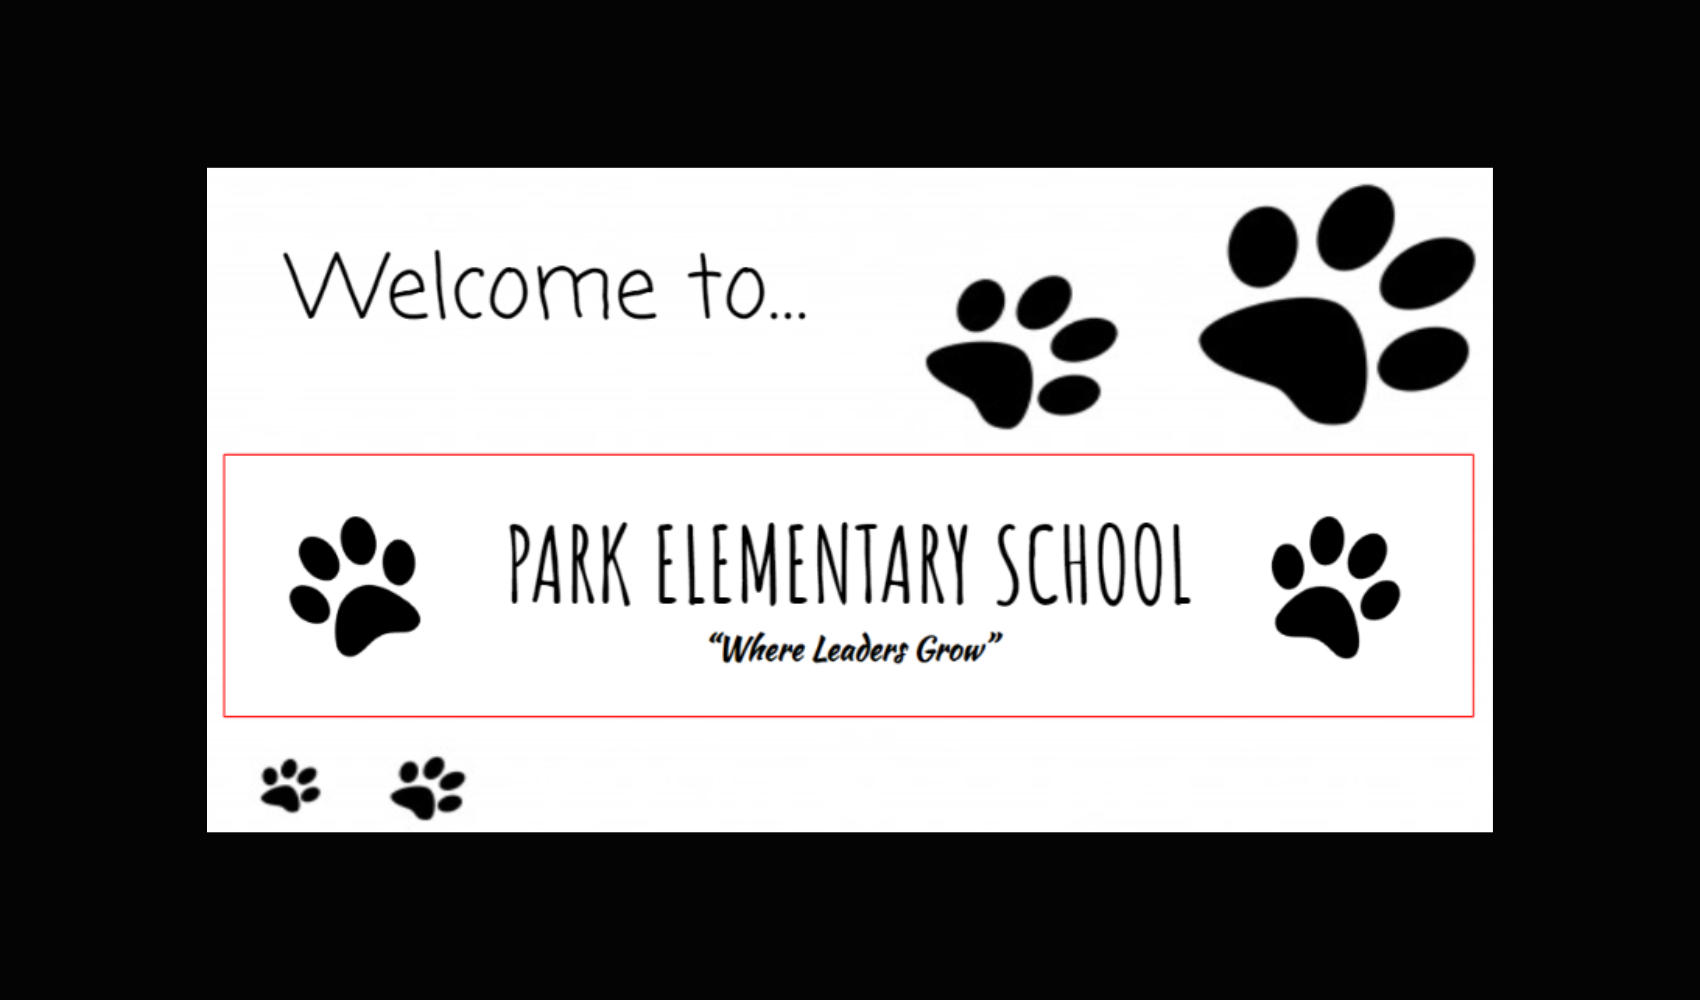 Welcome to Park Elementary School Where Leaders Grow